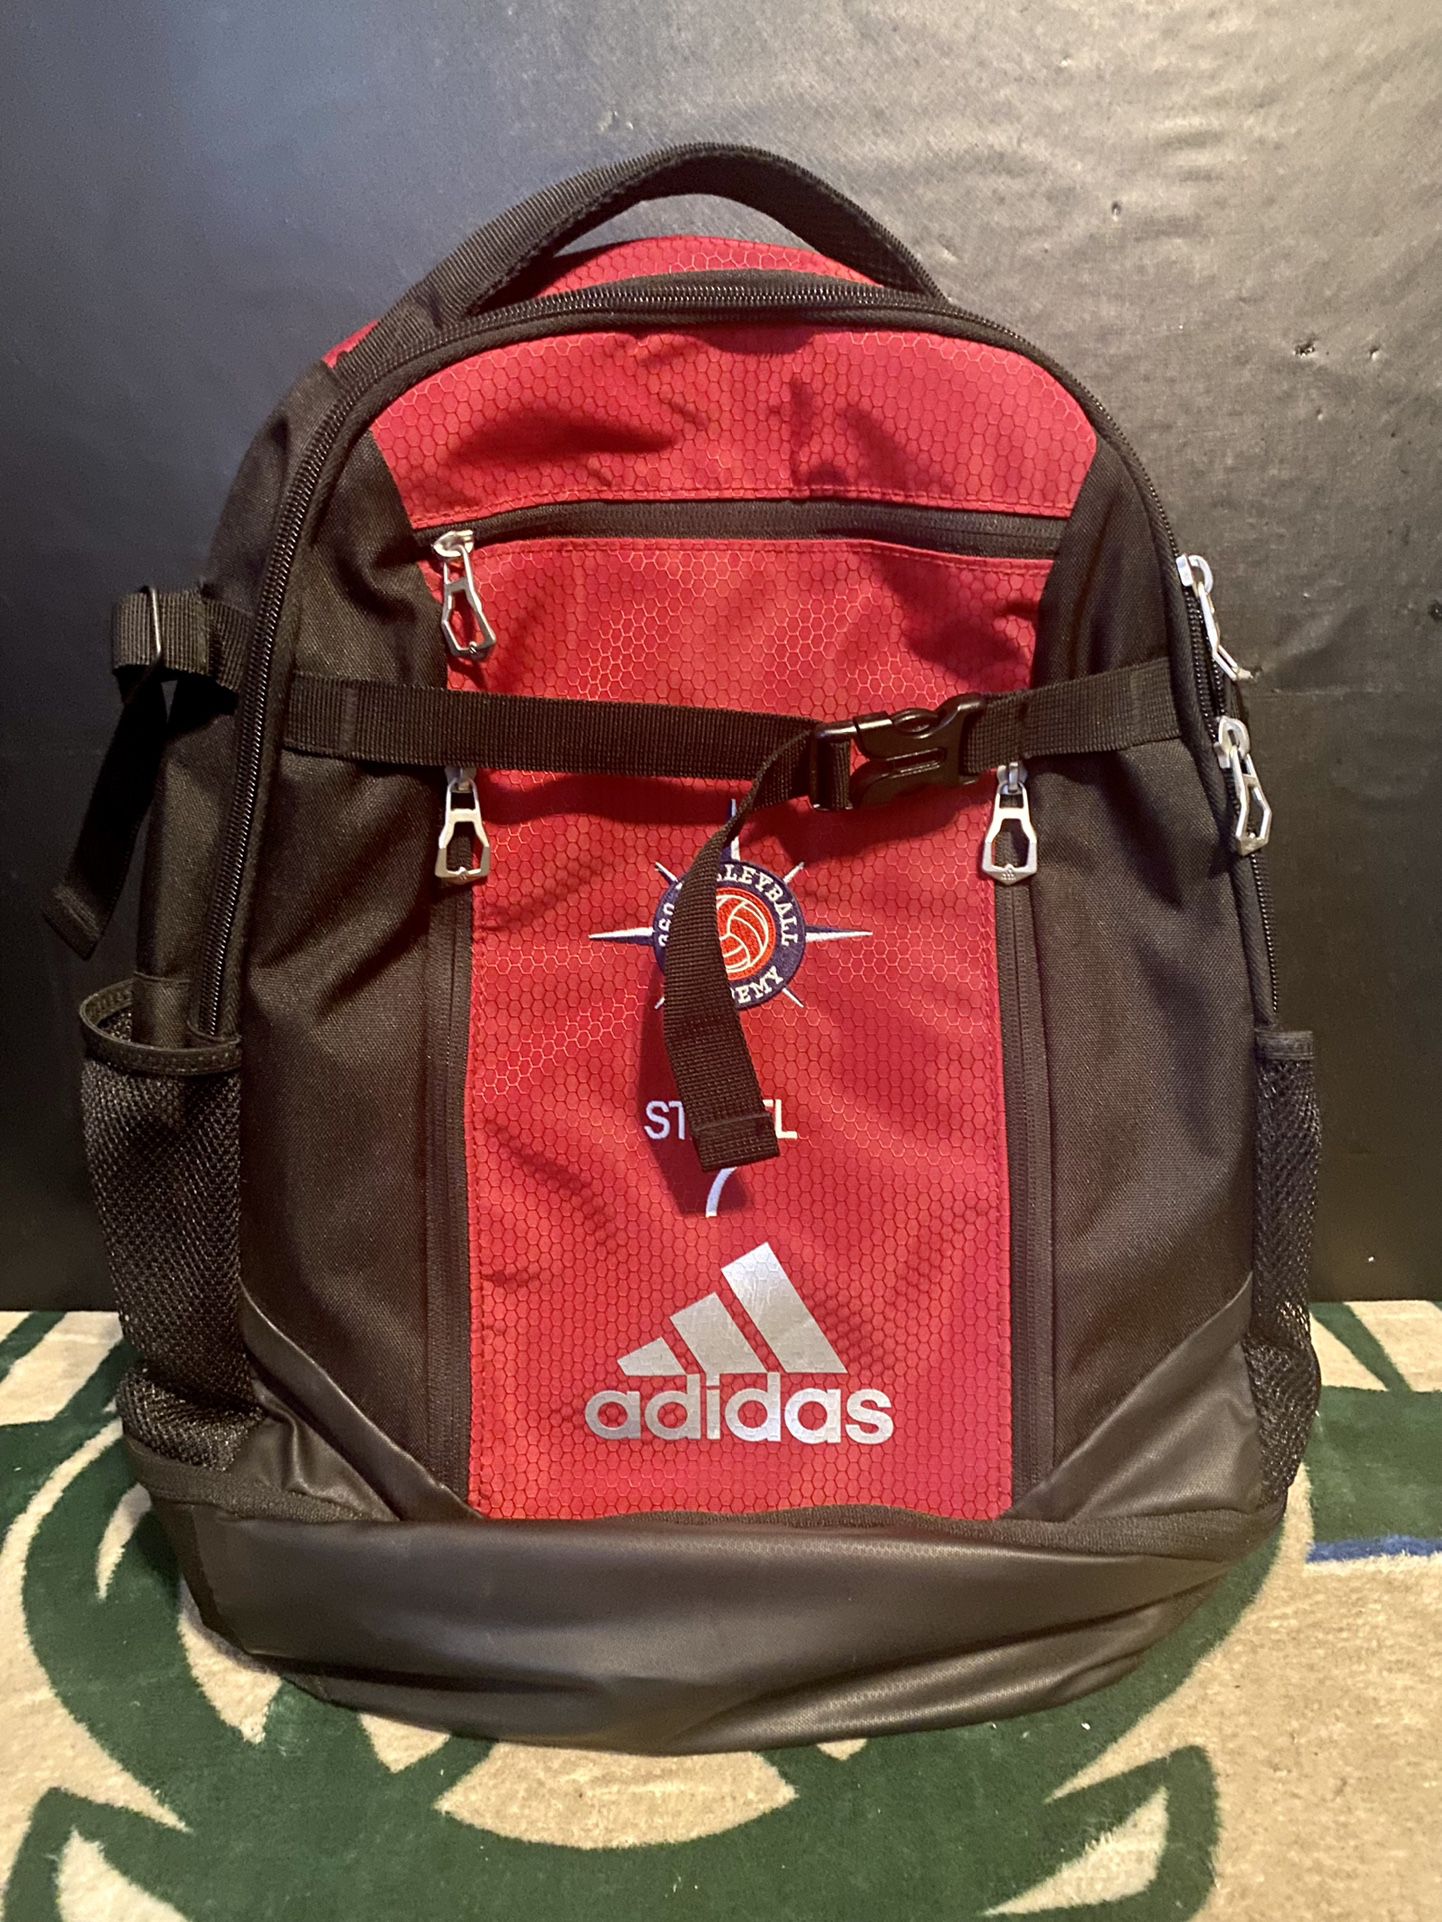 Adidas 360 Volleyball Academy Laptop Backpack.